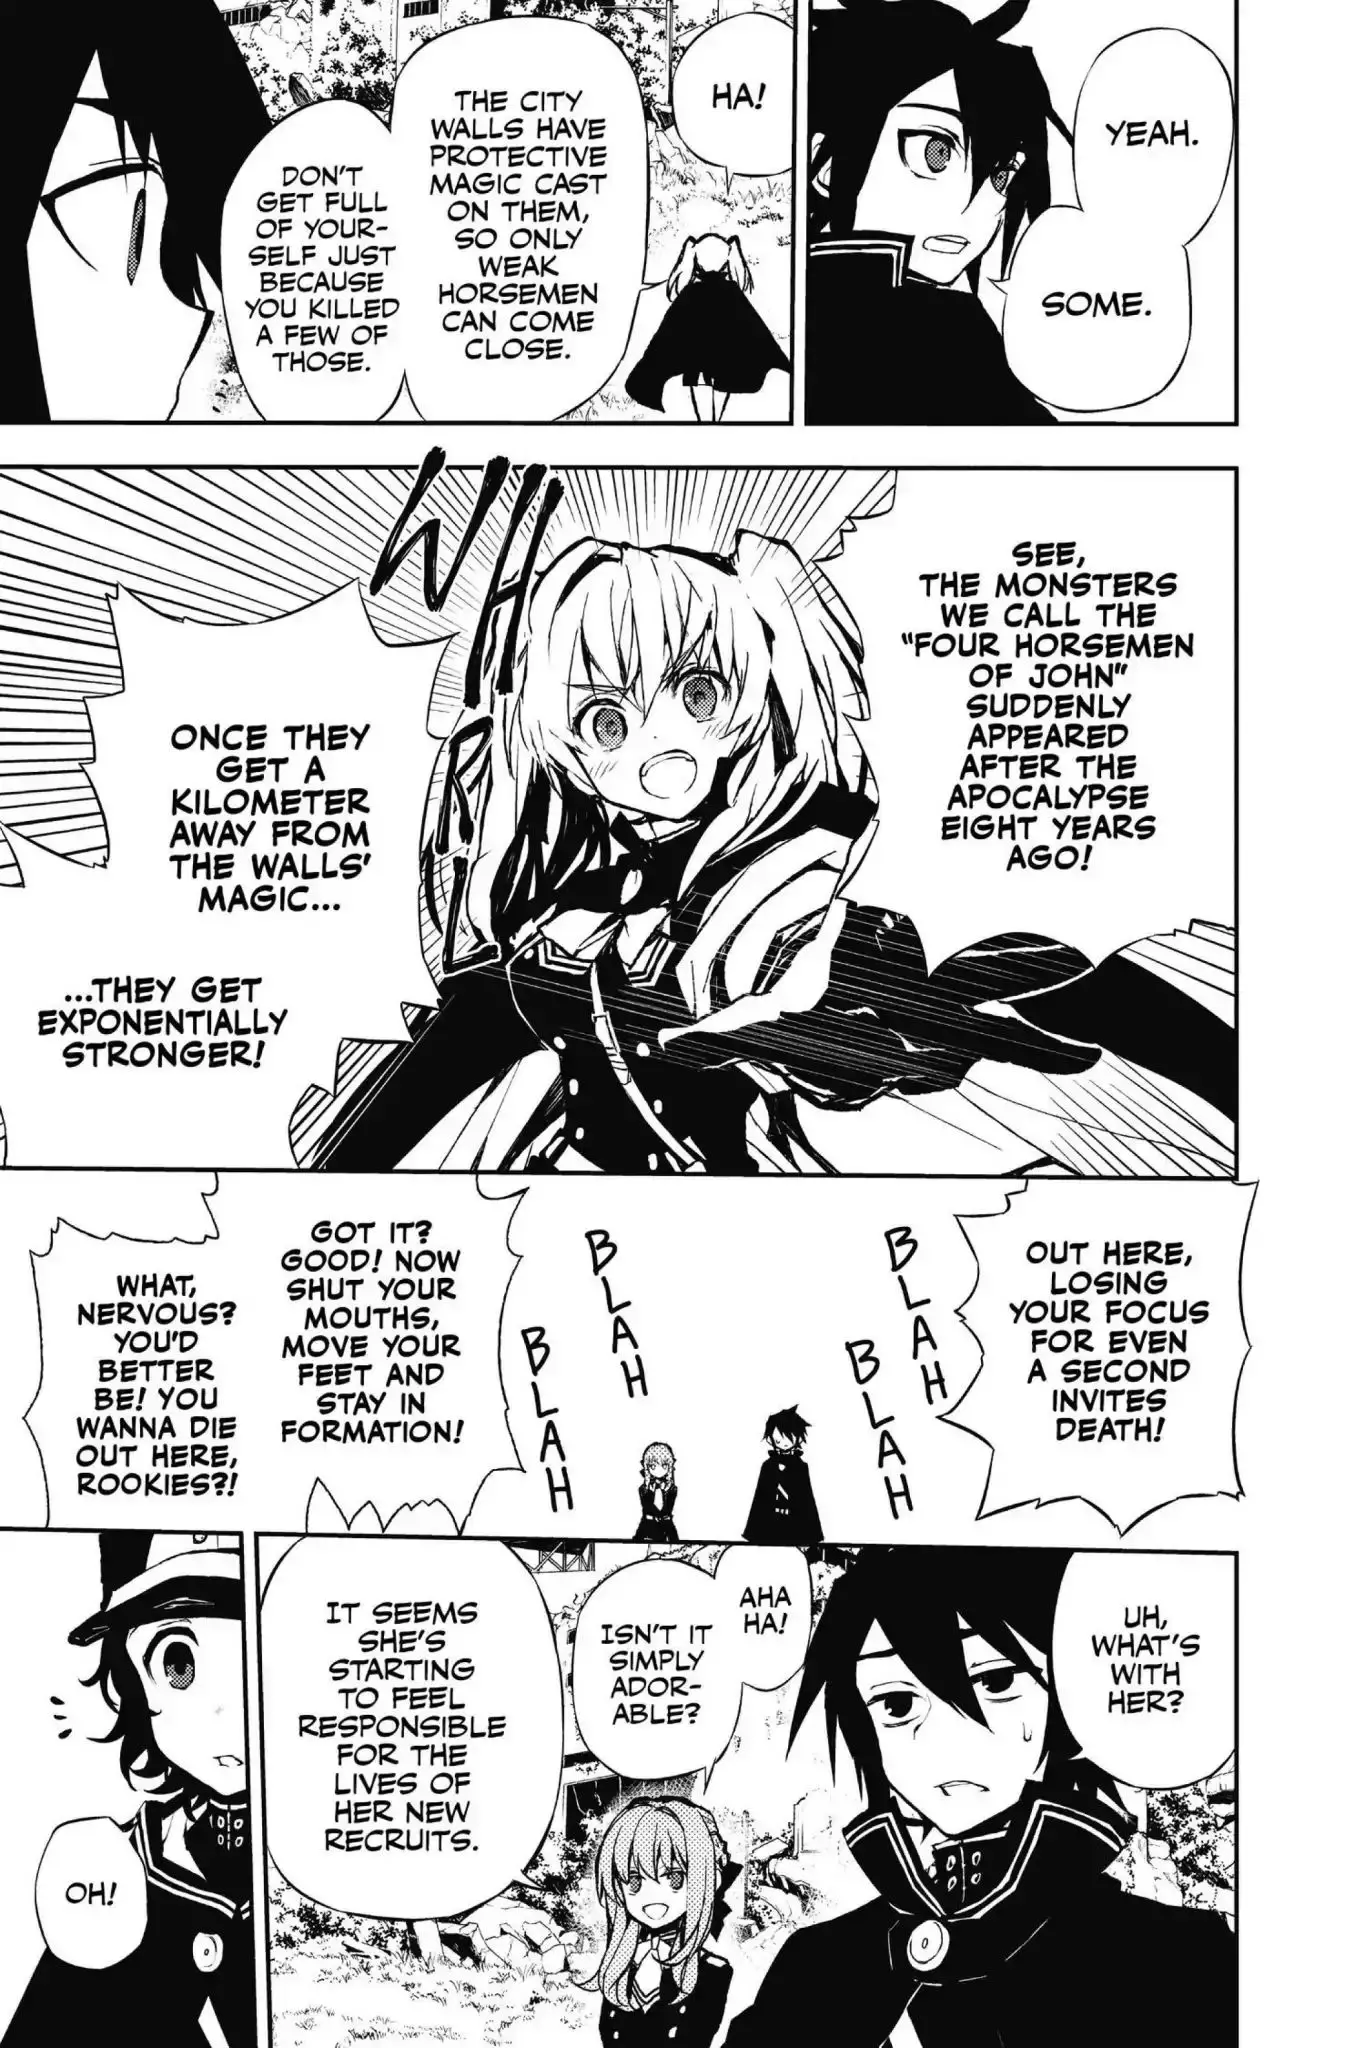 Seraph Of The End - 8 page 27-6222903c